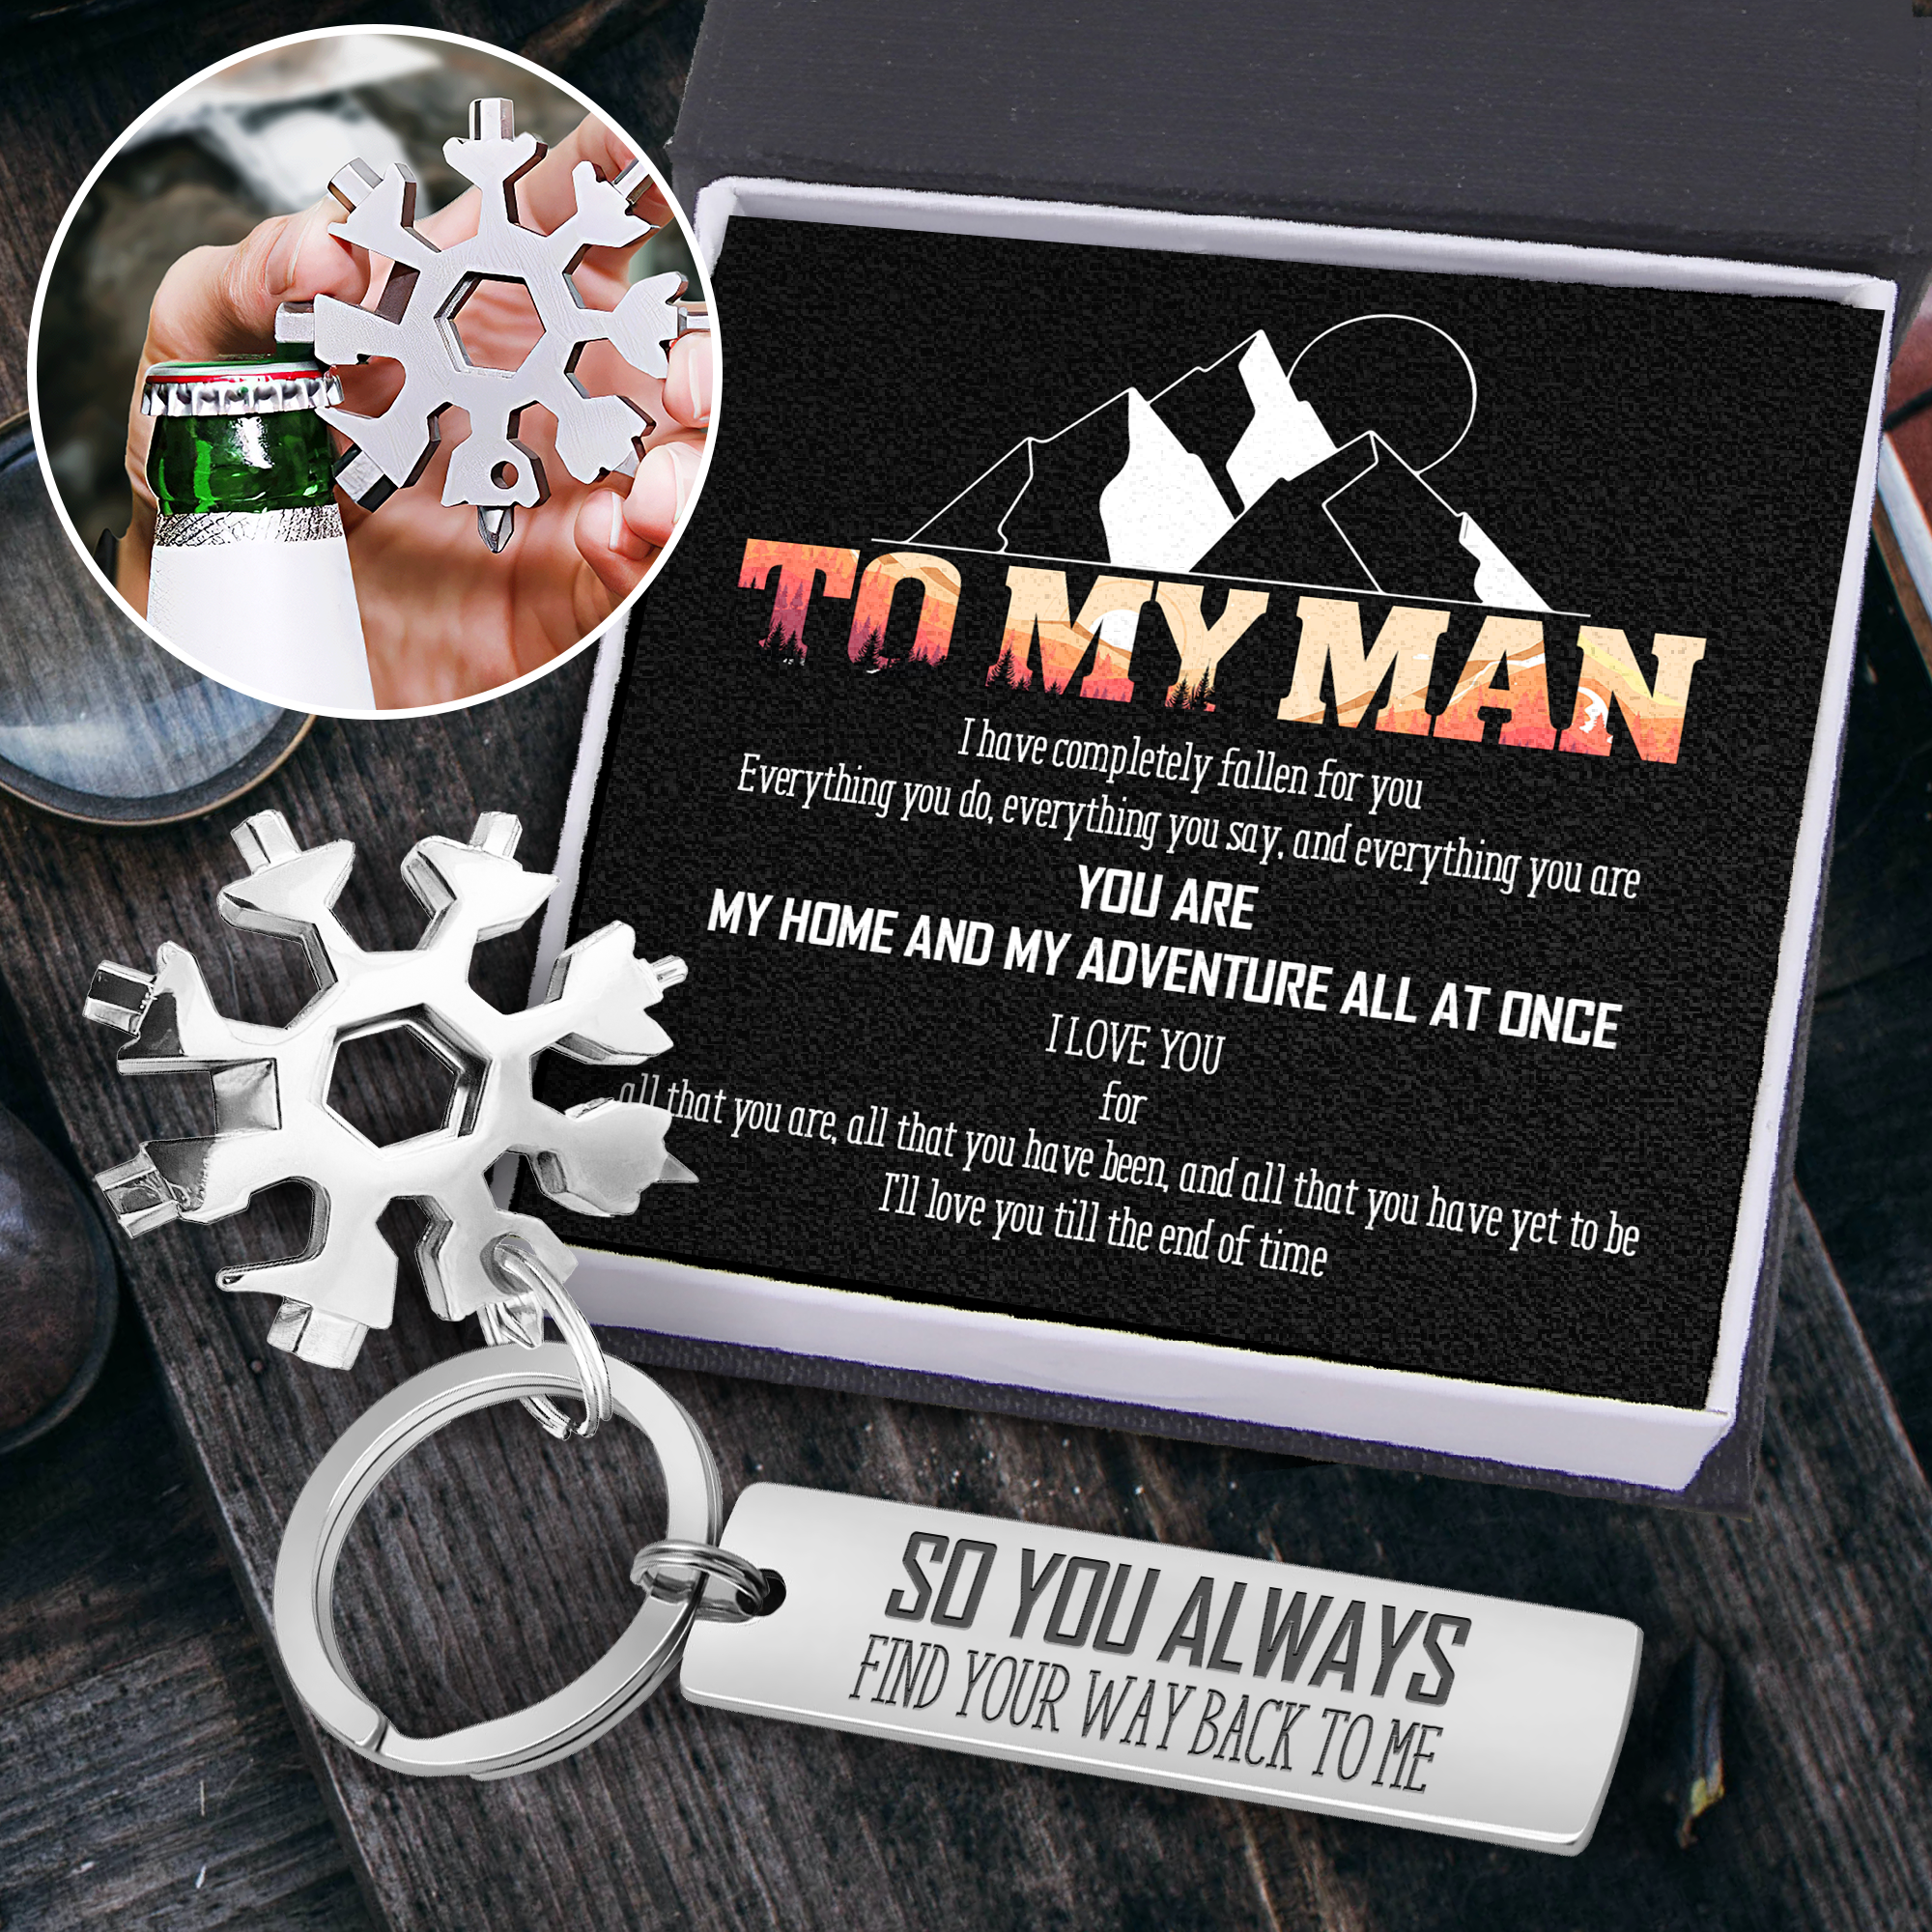 Multitool Keychain - Hiking - To My Man - So You Always Find Your Way Back To Me - Ukgktb26001